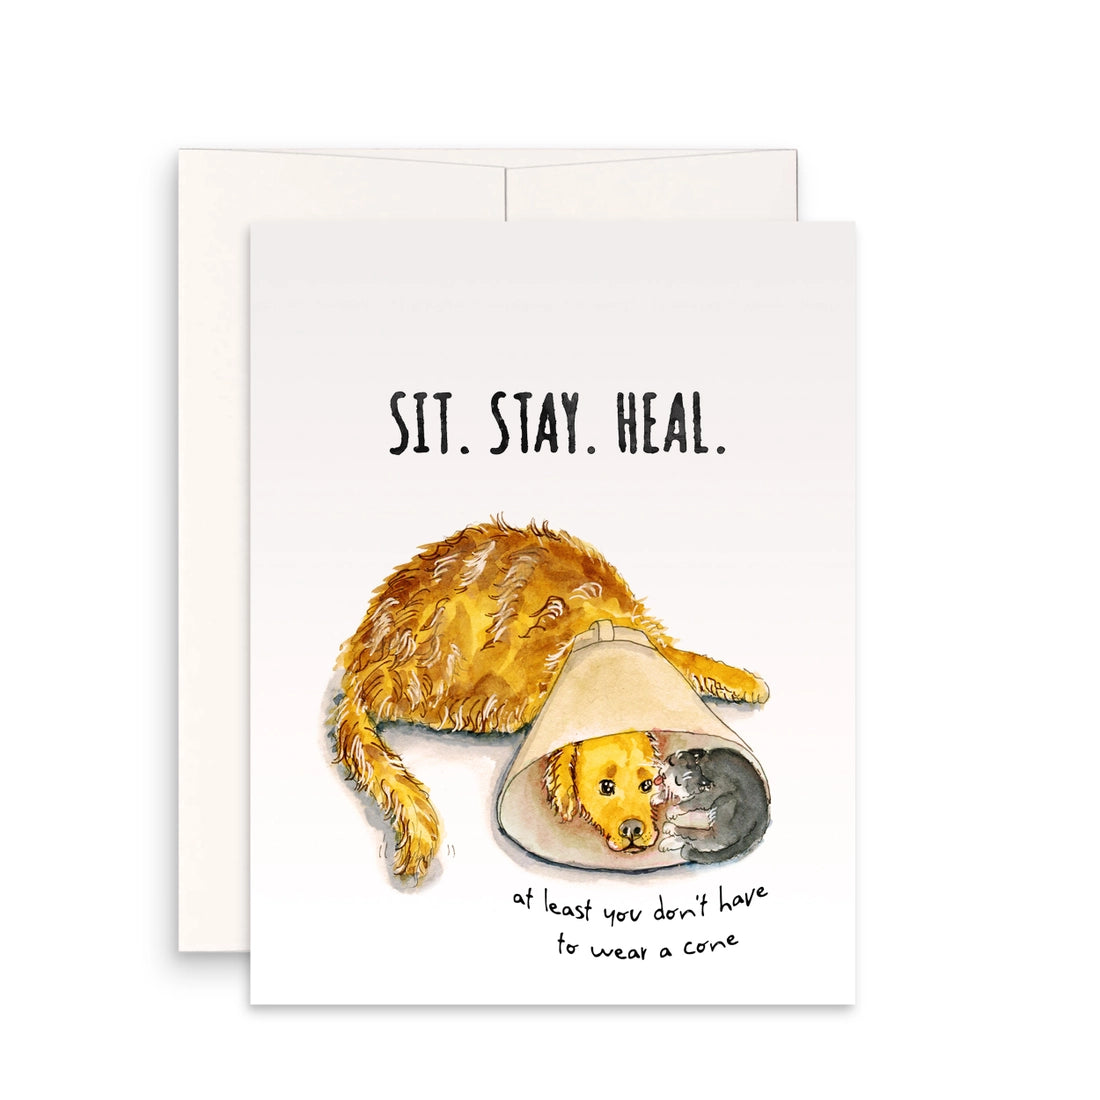 get well card that says "sit. stay. heal. at least you don't have to wear a cone" with a picture of a golden retriever wearing a cone with a cat